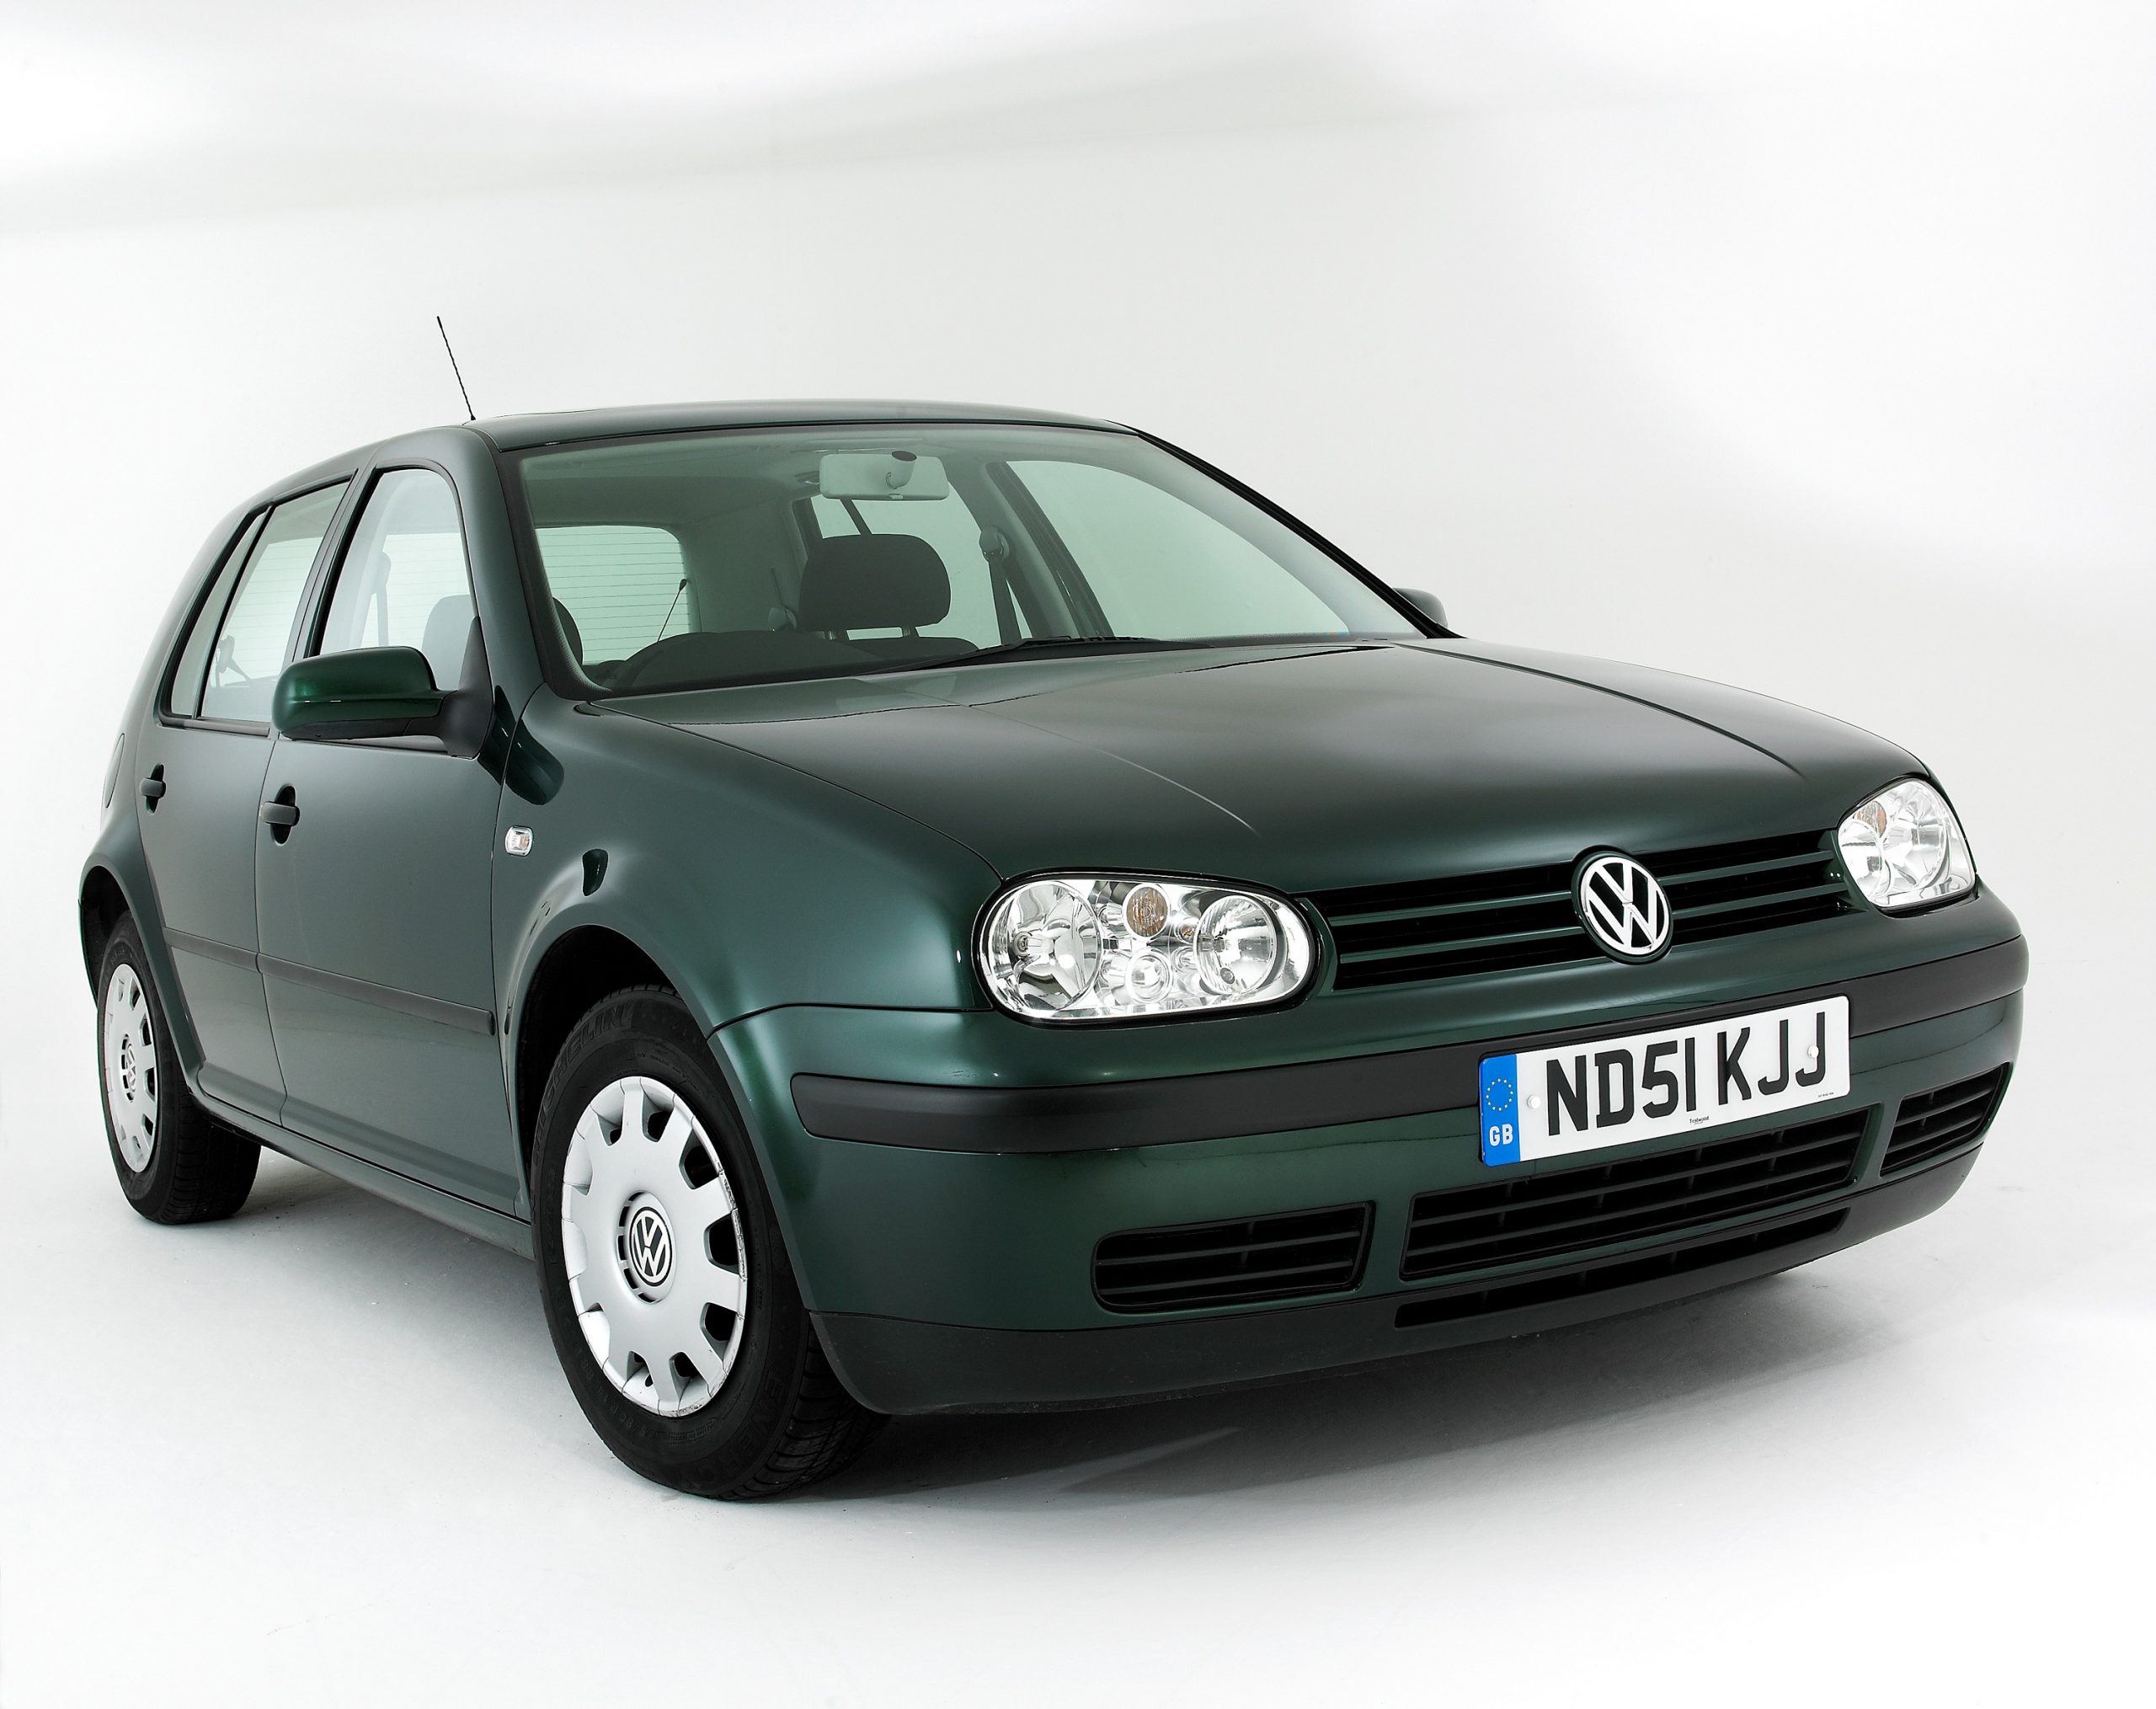 A green Volkswagen Golf subcompact car shot from the front 3/4